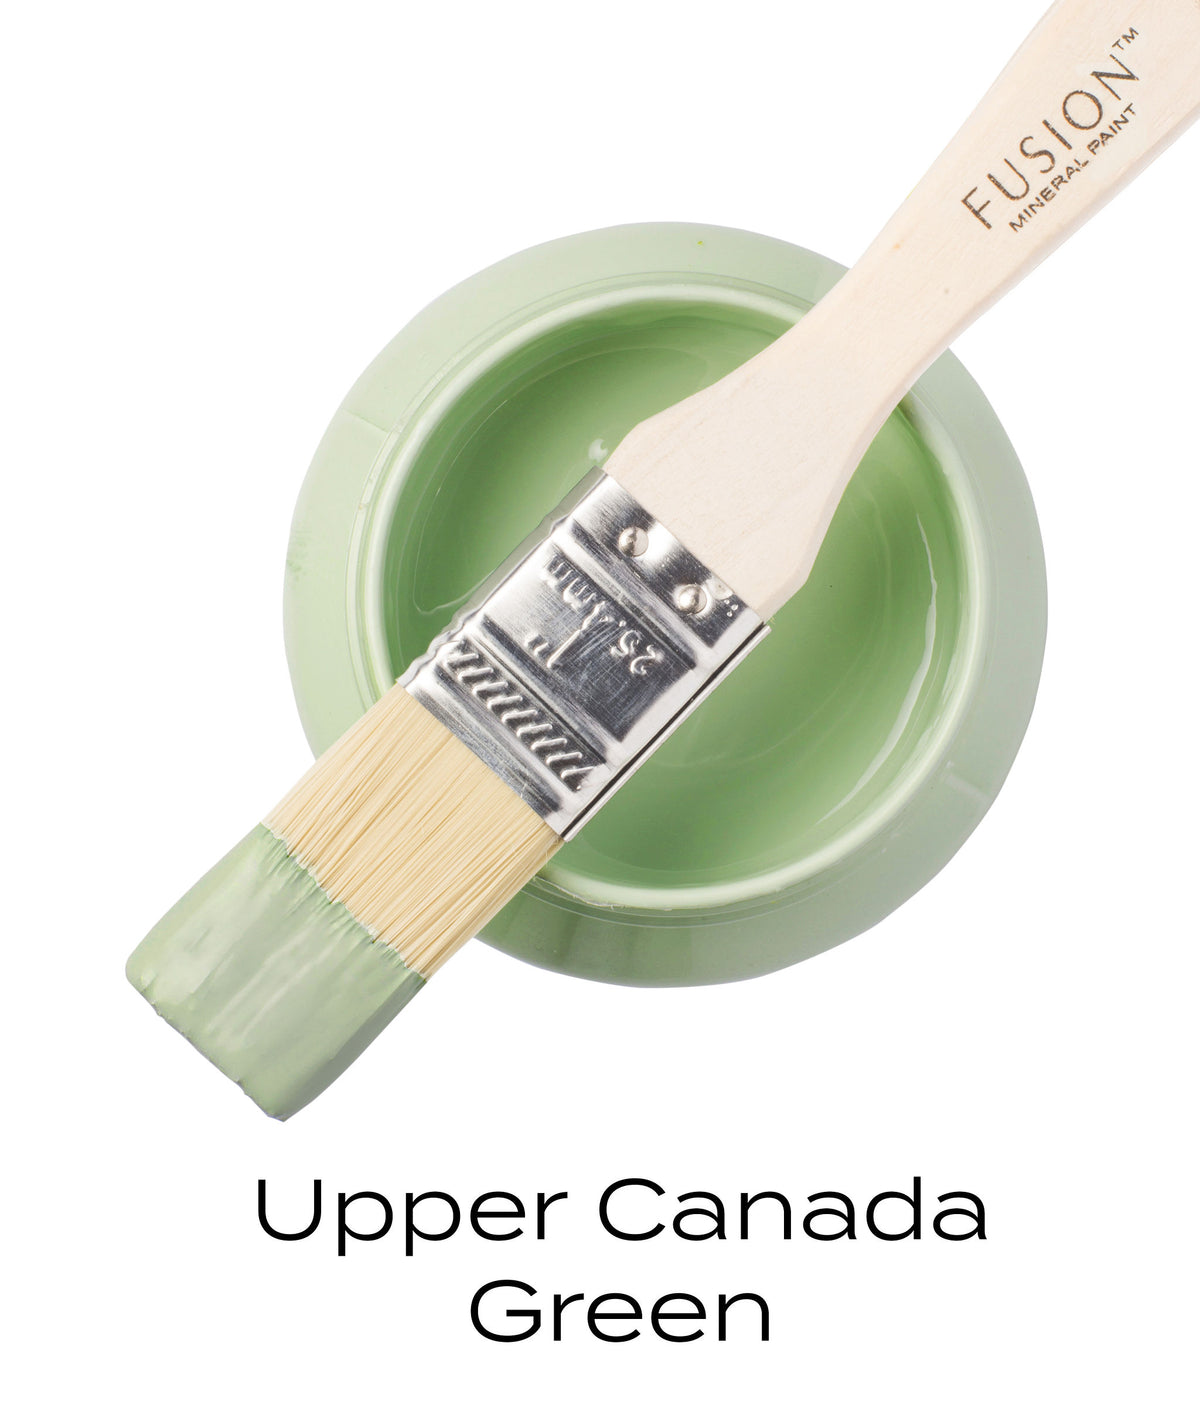 Upper Canada Green- Fusion Mineral Paint